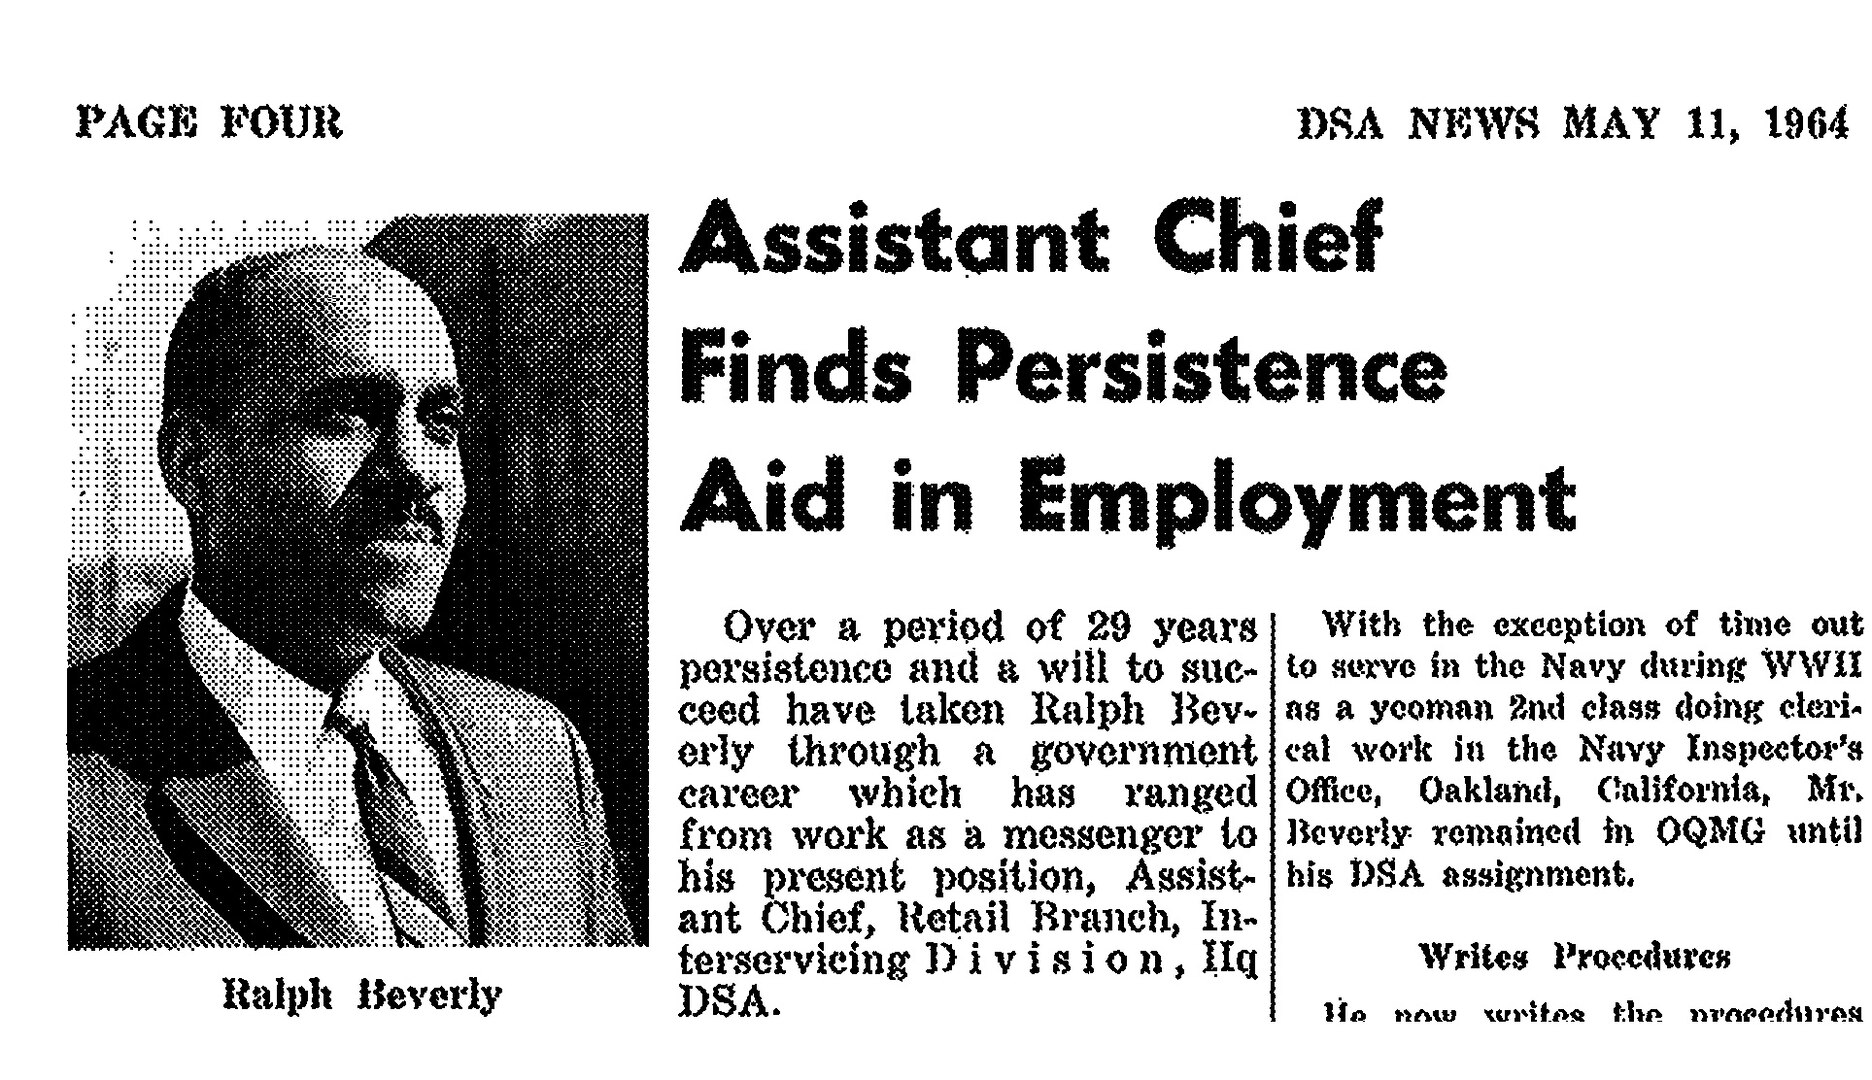 Ralph Beverly, who served as assistant chief of the Retail Branch in DSA’s Interservicing Division, began his federal career as a messenger in 1939.